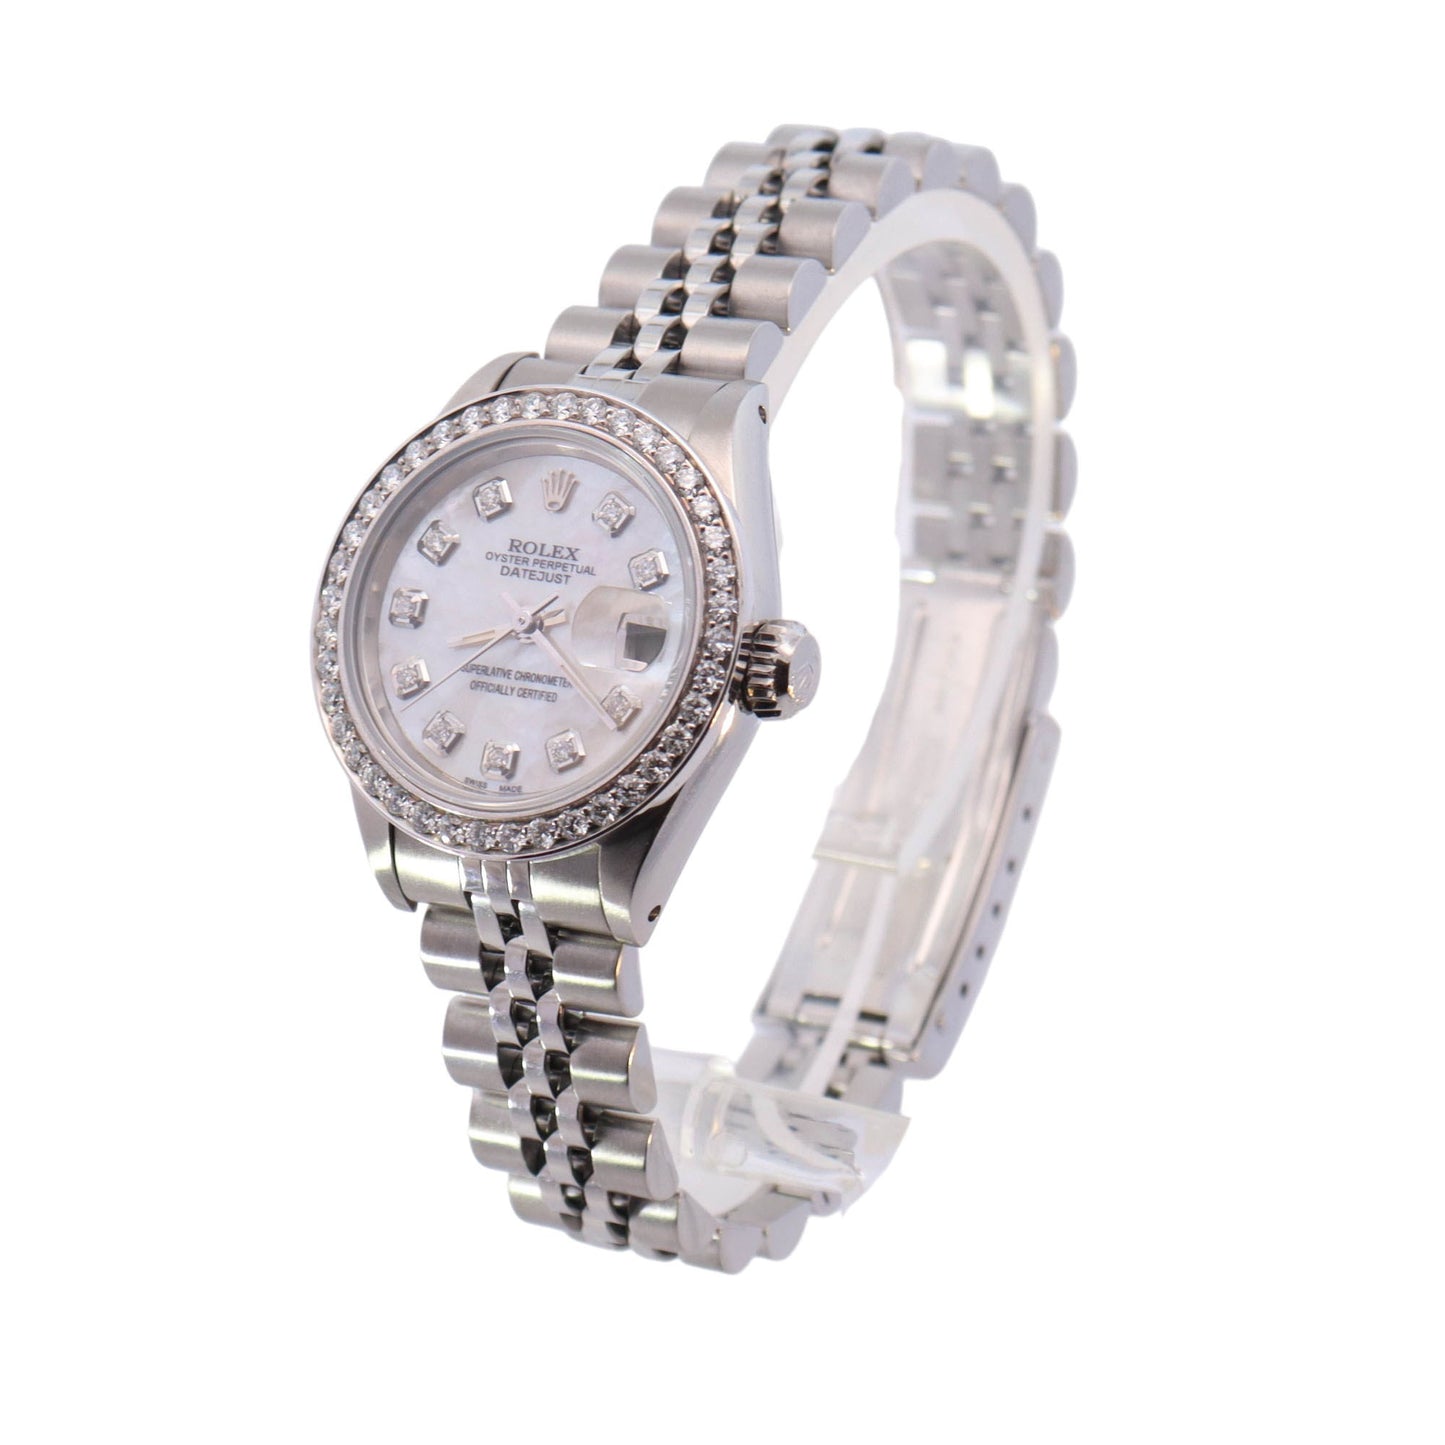 Rolex Datejust Stainless Steel 26mm White MOP Diamond Dial Watch Reference #: 69174